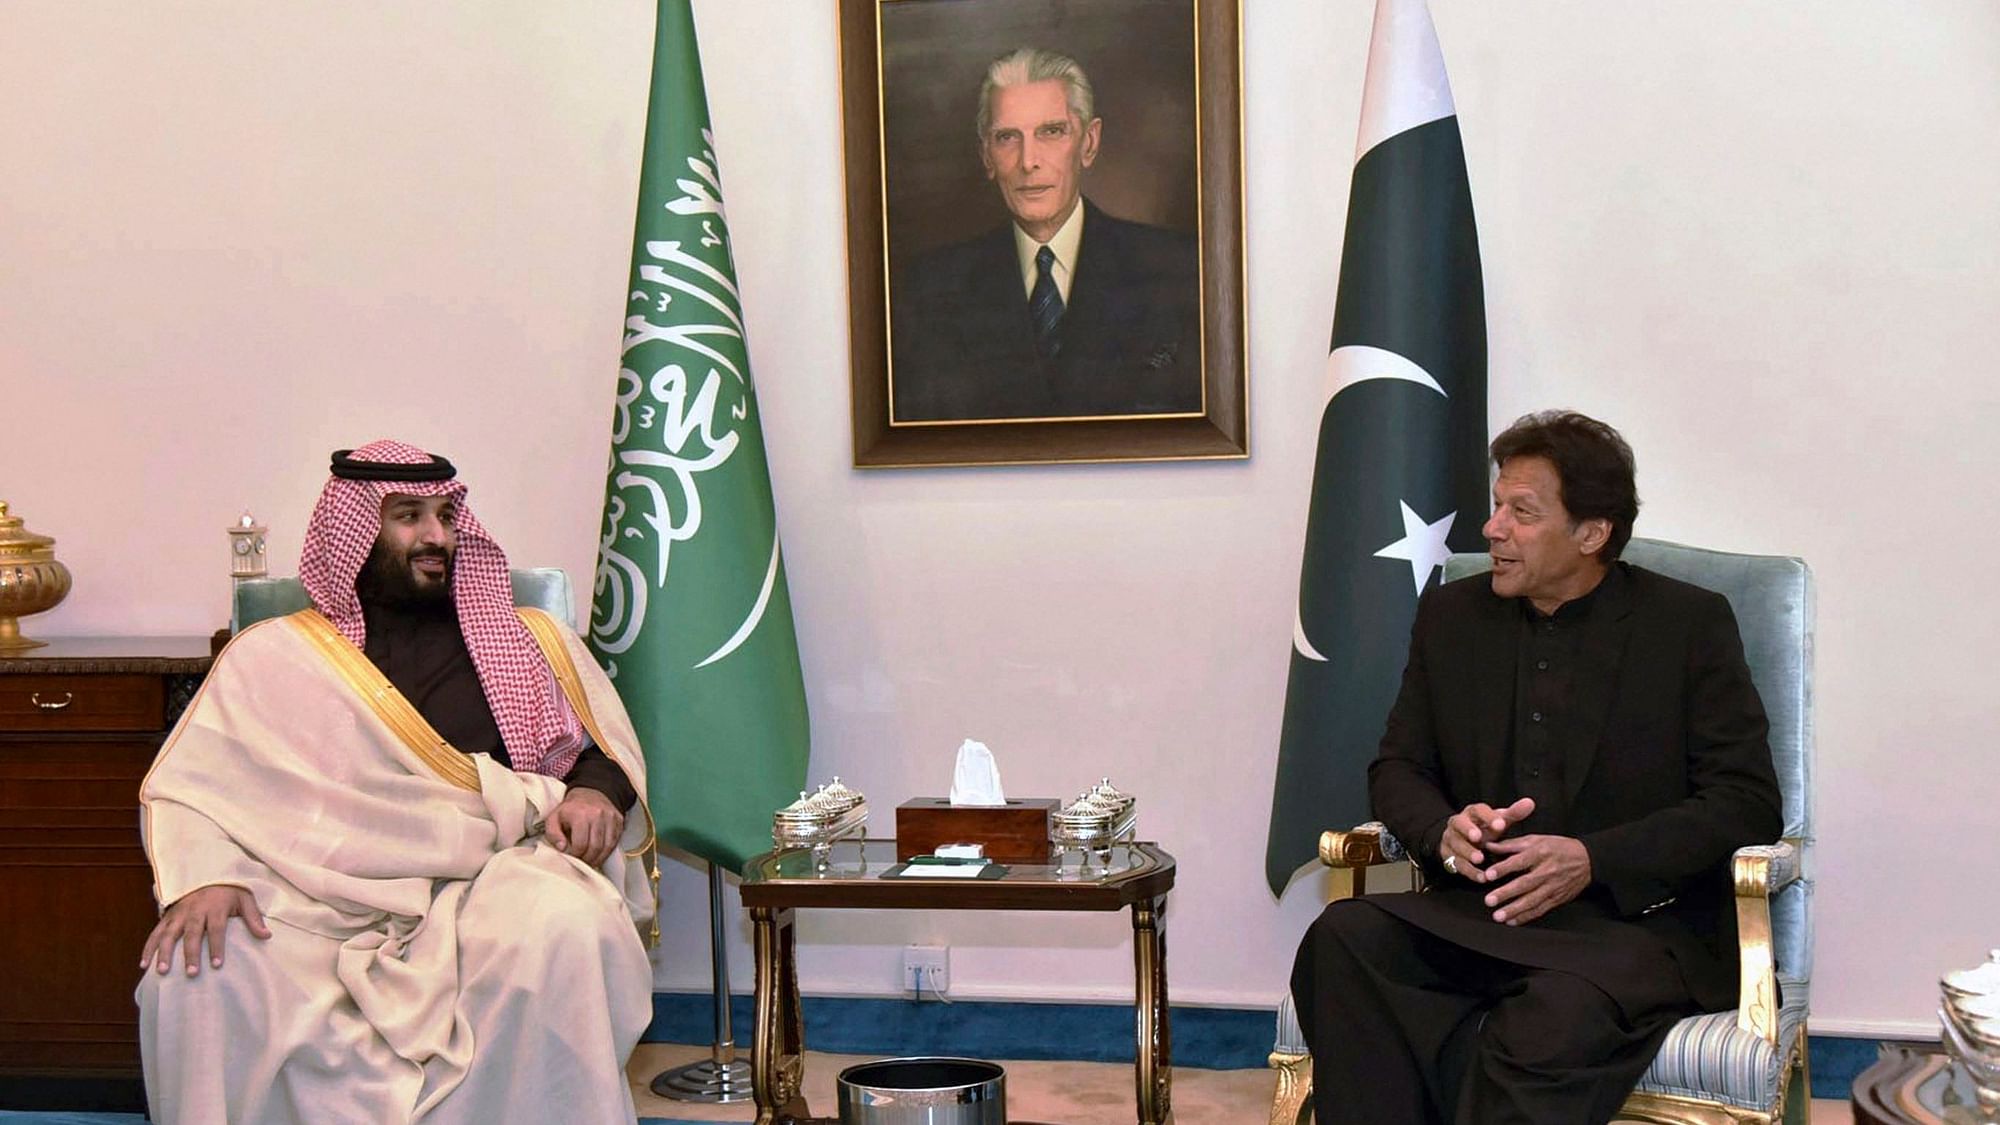 Saudi Arabia’s powerful Crown Prince Mohammed bin Salman began his four-day regional visit on Sunday, arriving in Pakistan where he is expected to sign agreements worth billions of dollars to help the Islamic nation overcome its financial crisis.